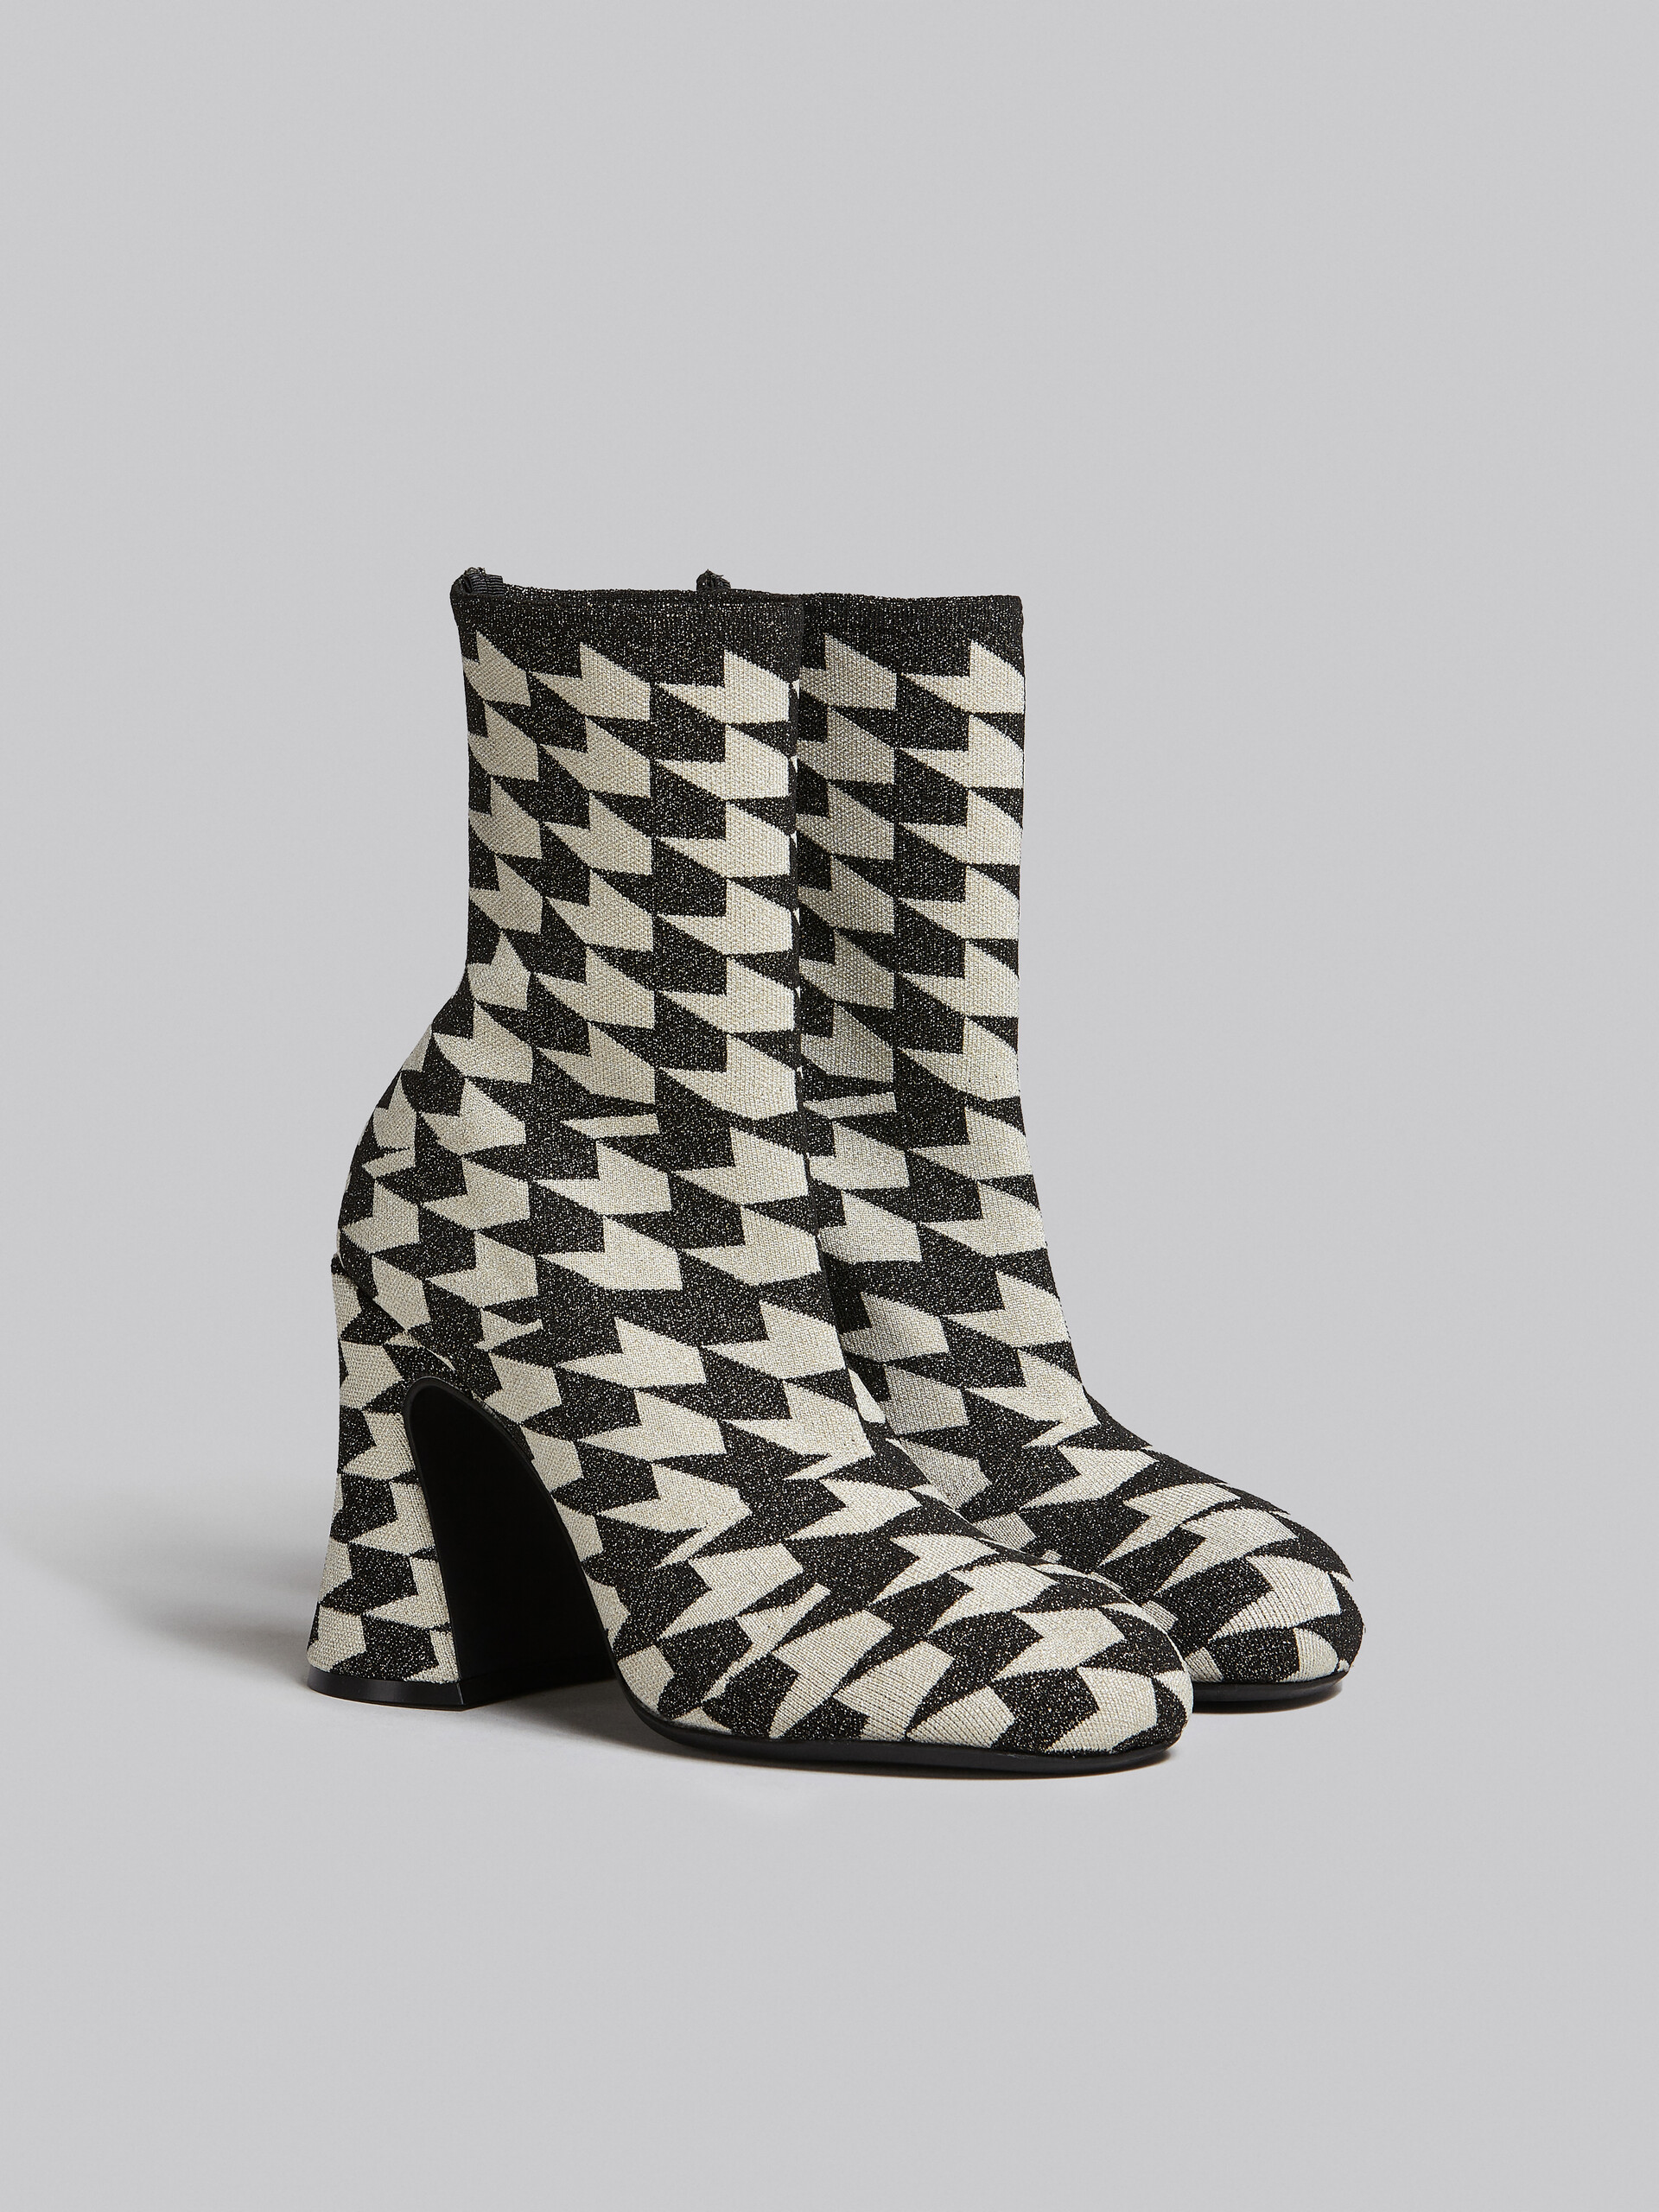 Black and white jacquard lurex ankle boot - Boots - Image 2